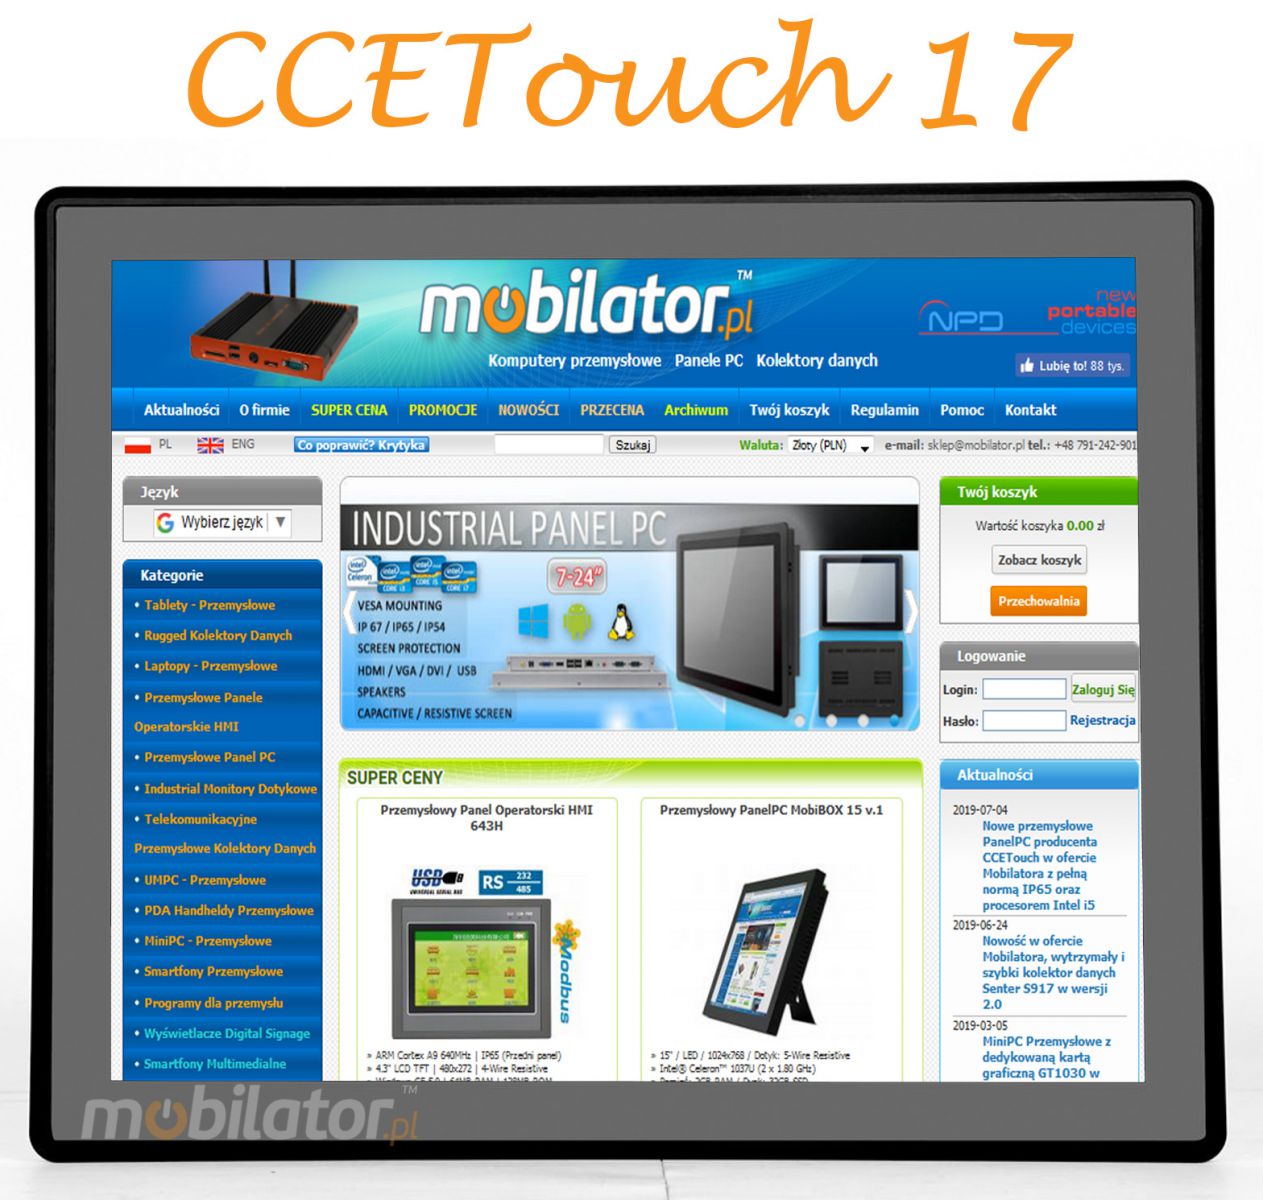 CCE Touch CTPC170RD3 Mobilator Flat Design PCAP Fanless Touch PC, LED panel, 10 points touch screen, built-in WIFI, 12V DC input